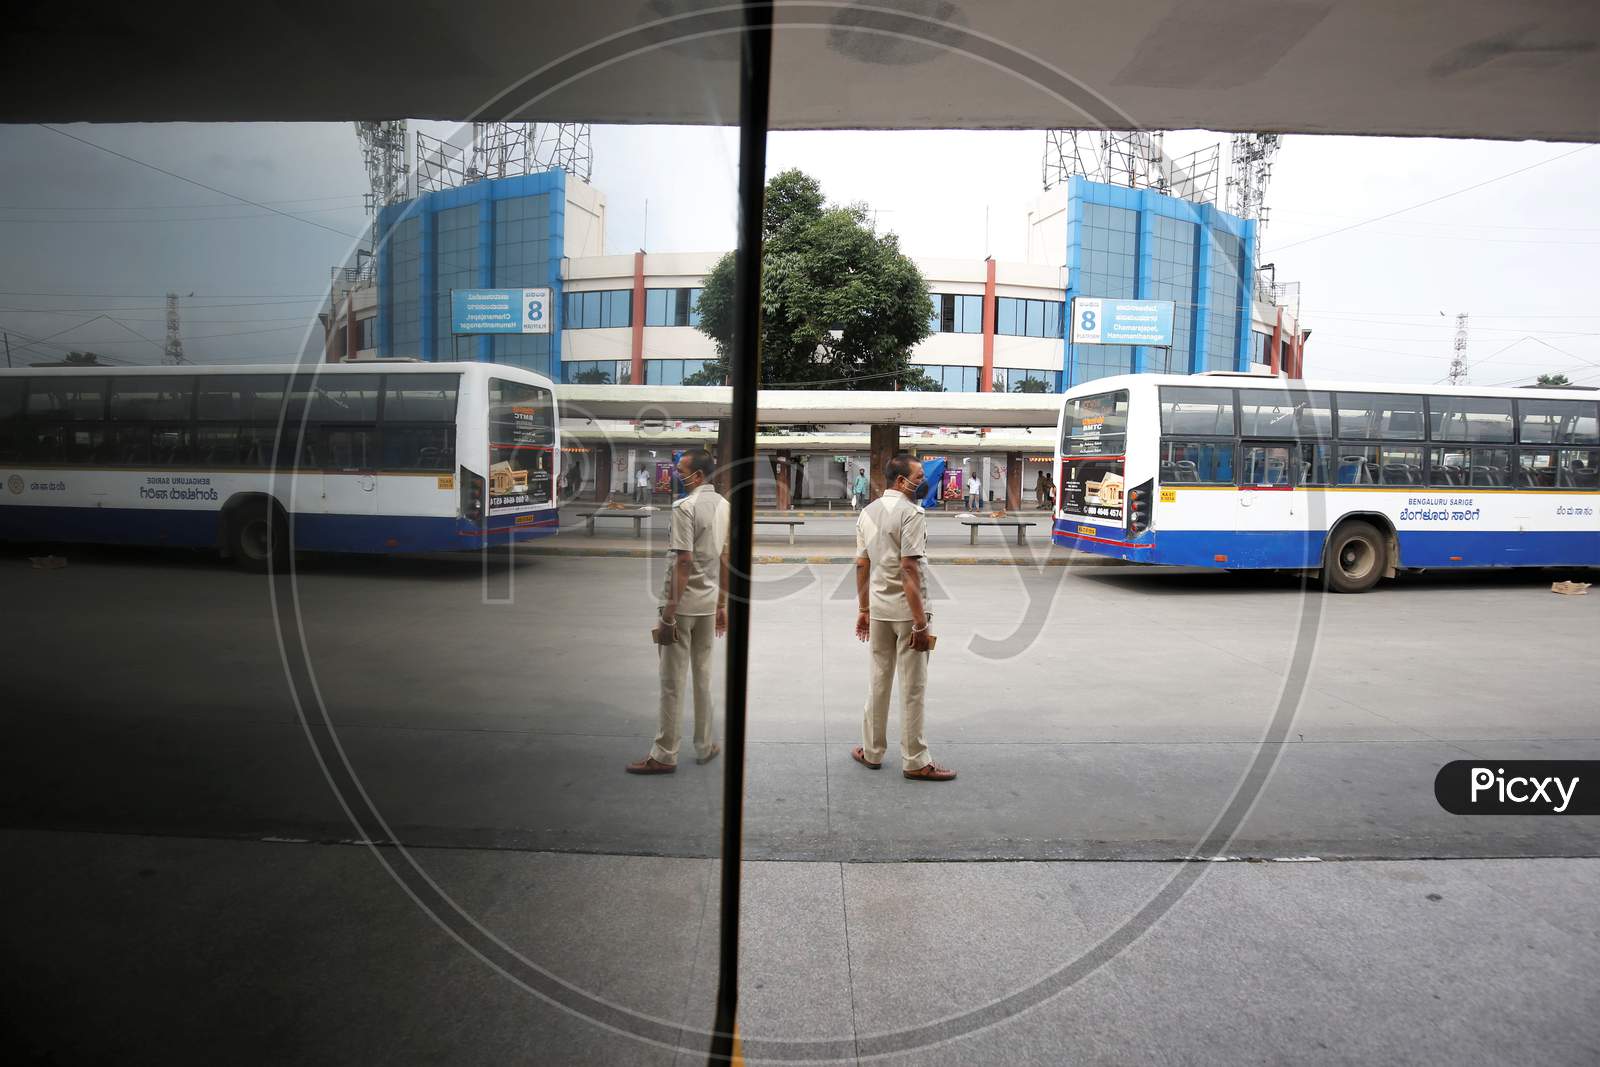 A ticket collector waits for passengers in a bus station after the state eased lockdown norms during the nationwide lockdown to prevent the spread of coronavirus (COVID-19) in Bangalore, India.